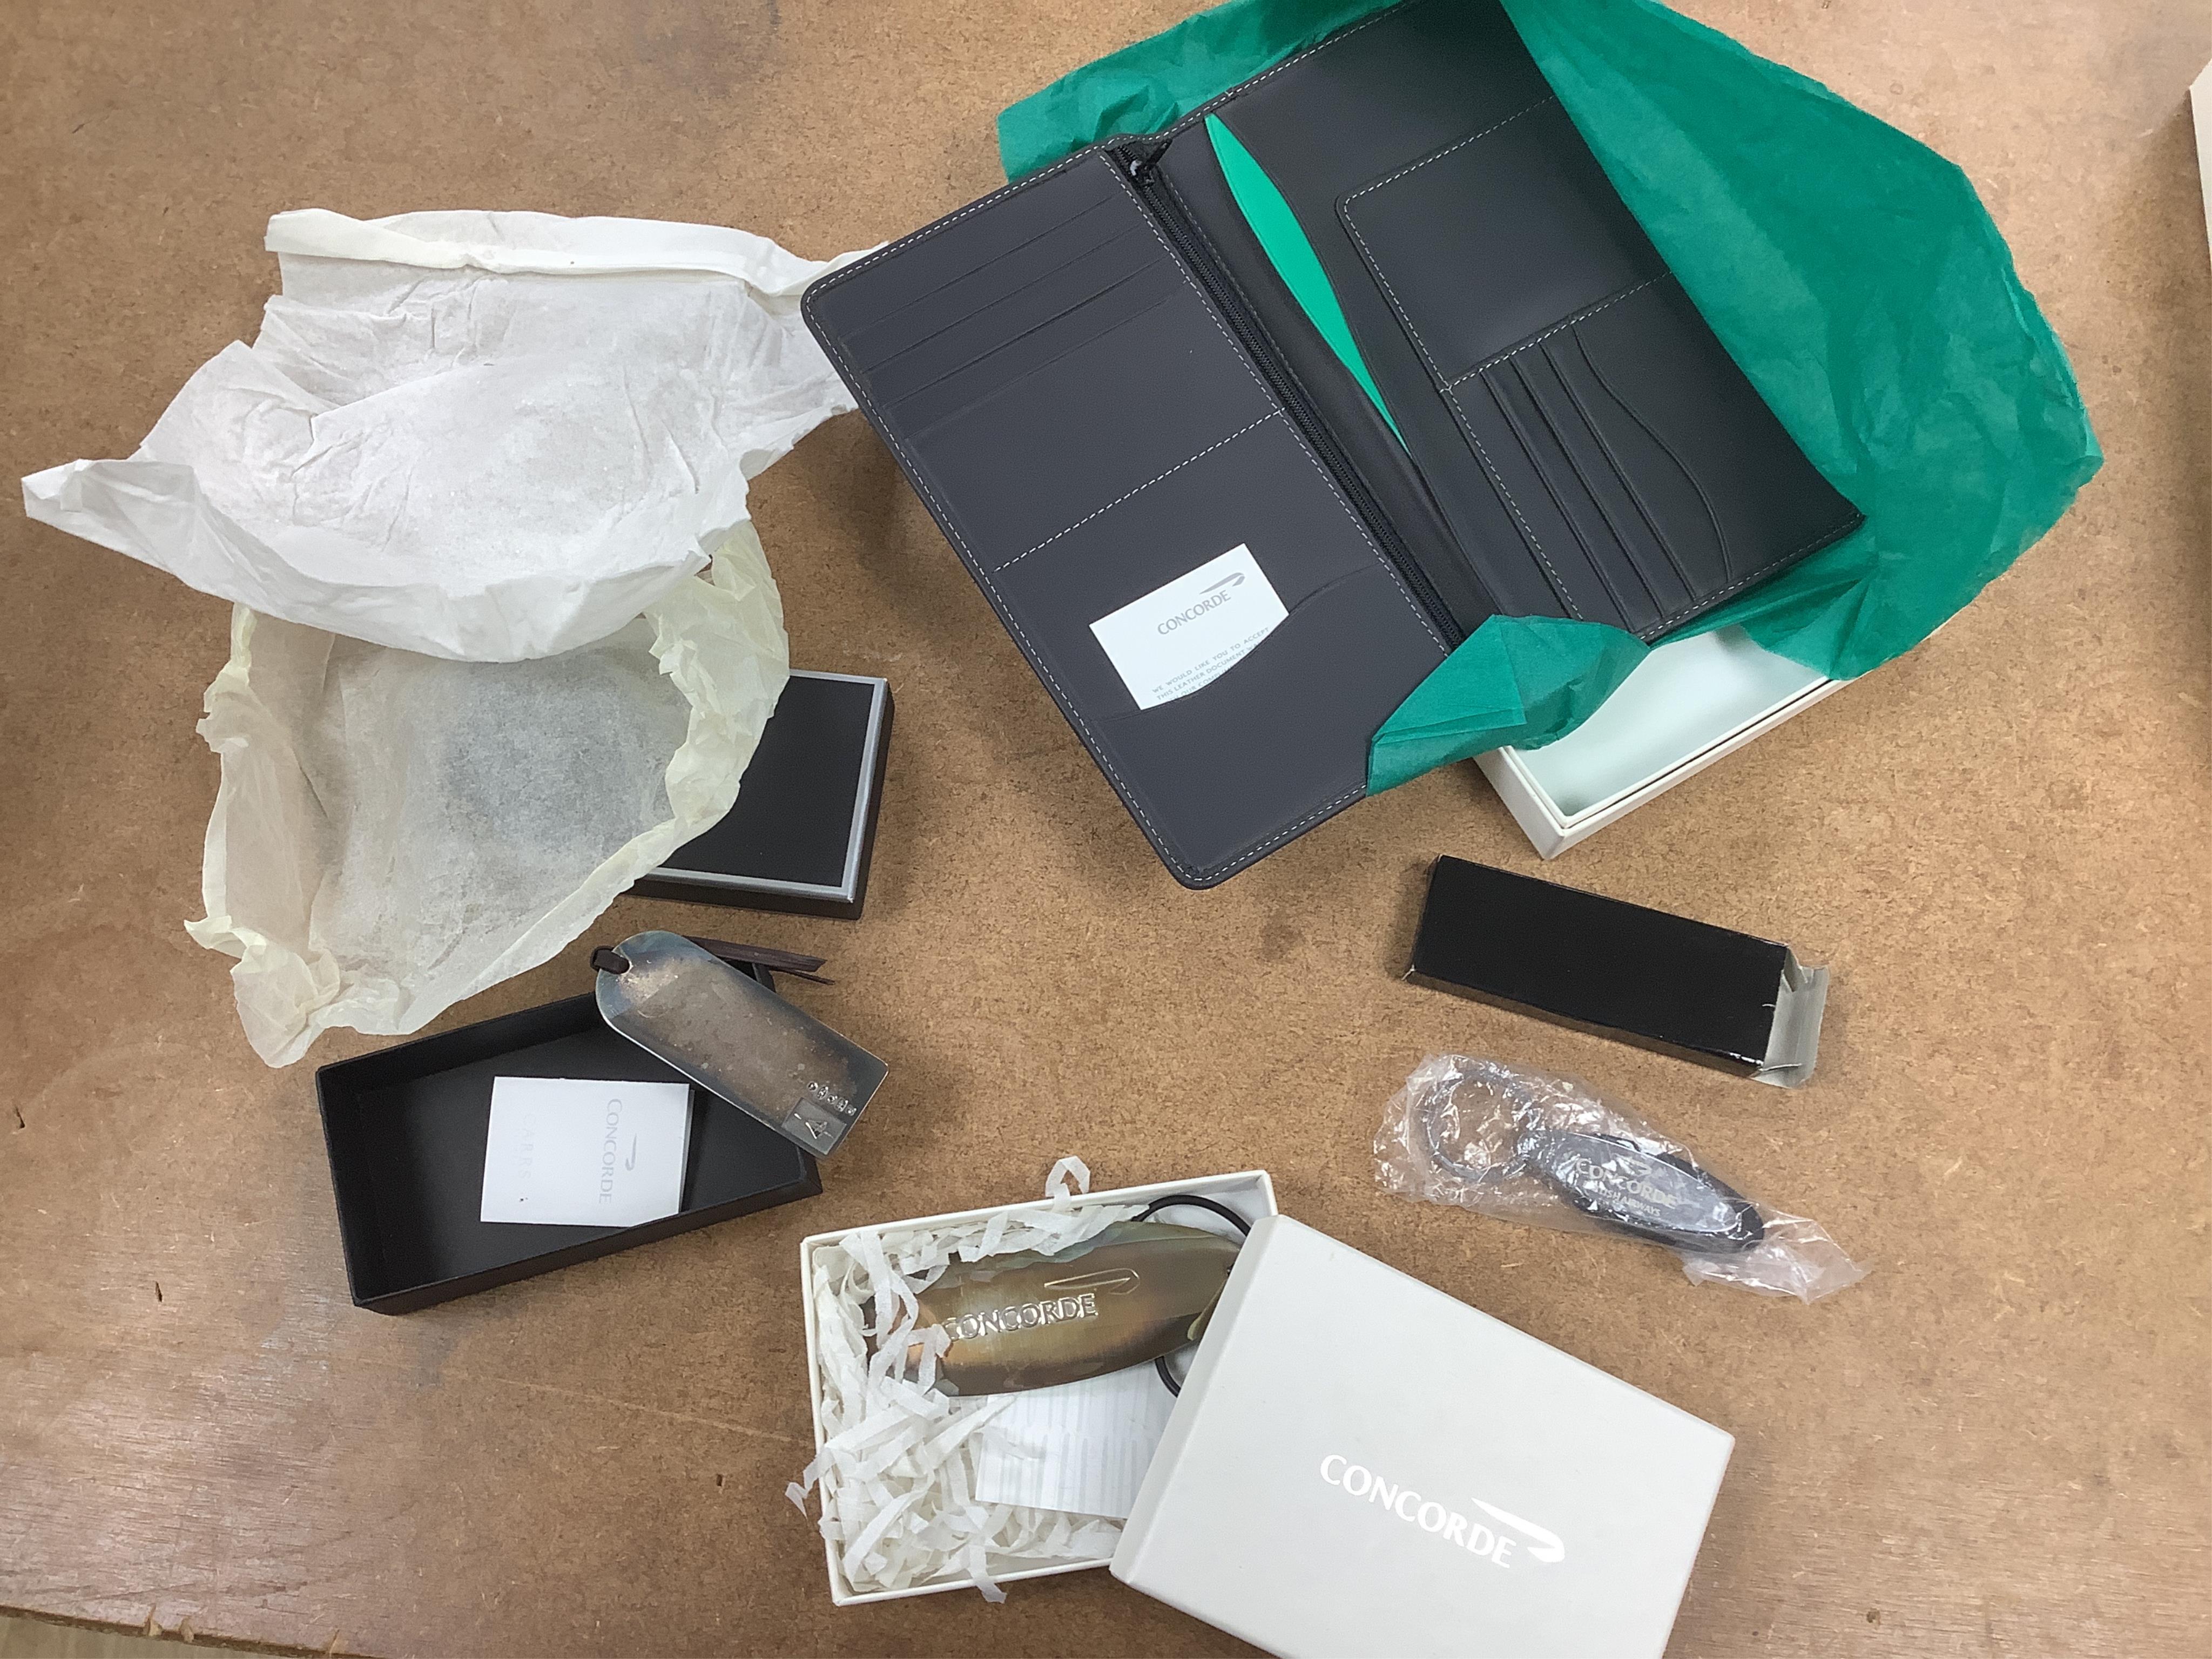 Concorde memorabilia: including silver baggage tags, key rings, Wedgwood photo frames, diaries, wallet, magazines and newspapers etc. condition - fair to good, some items unused